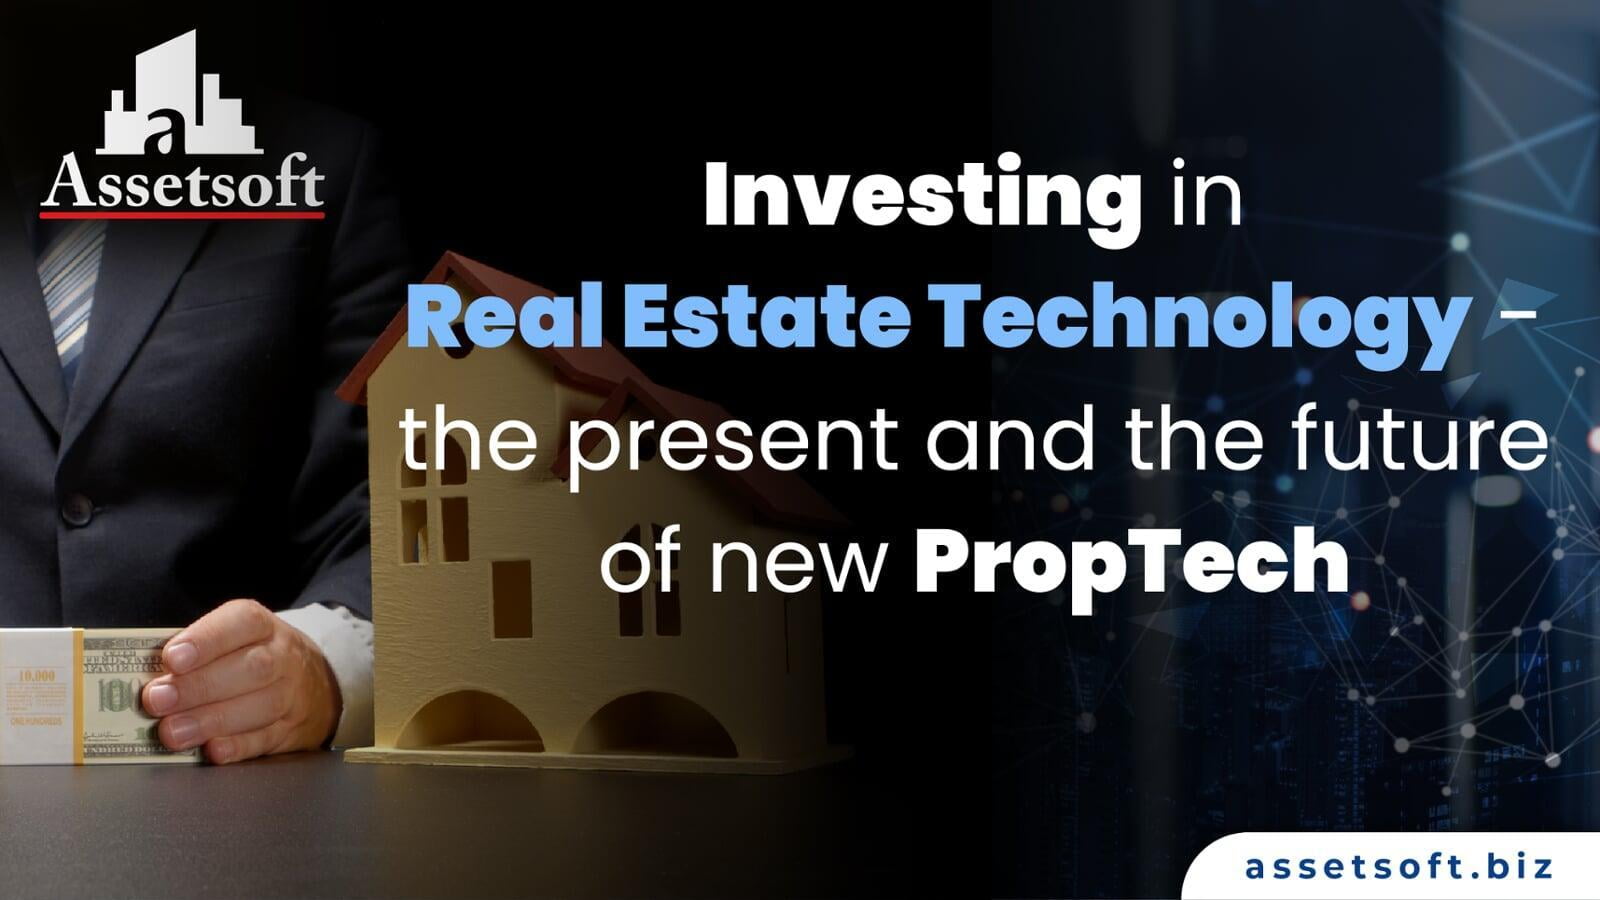 Investing in real estate technology - the present and the future of new PropTech  